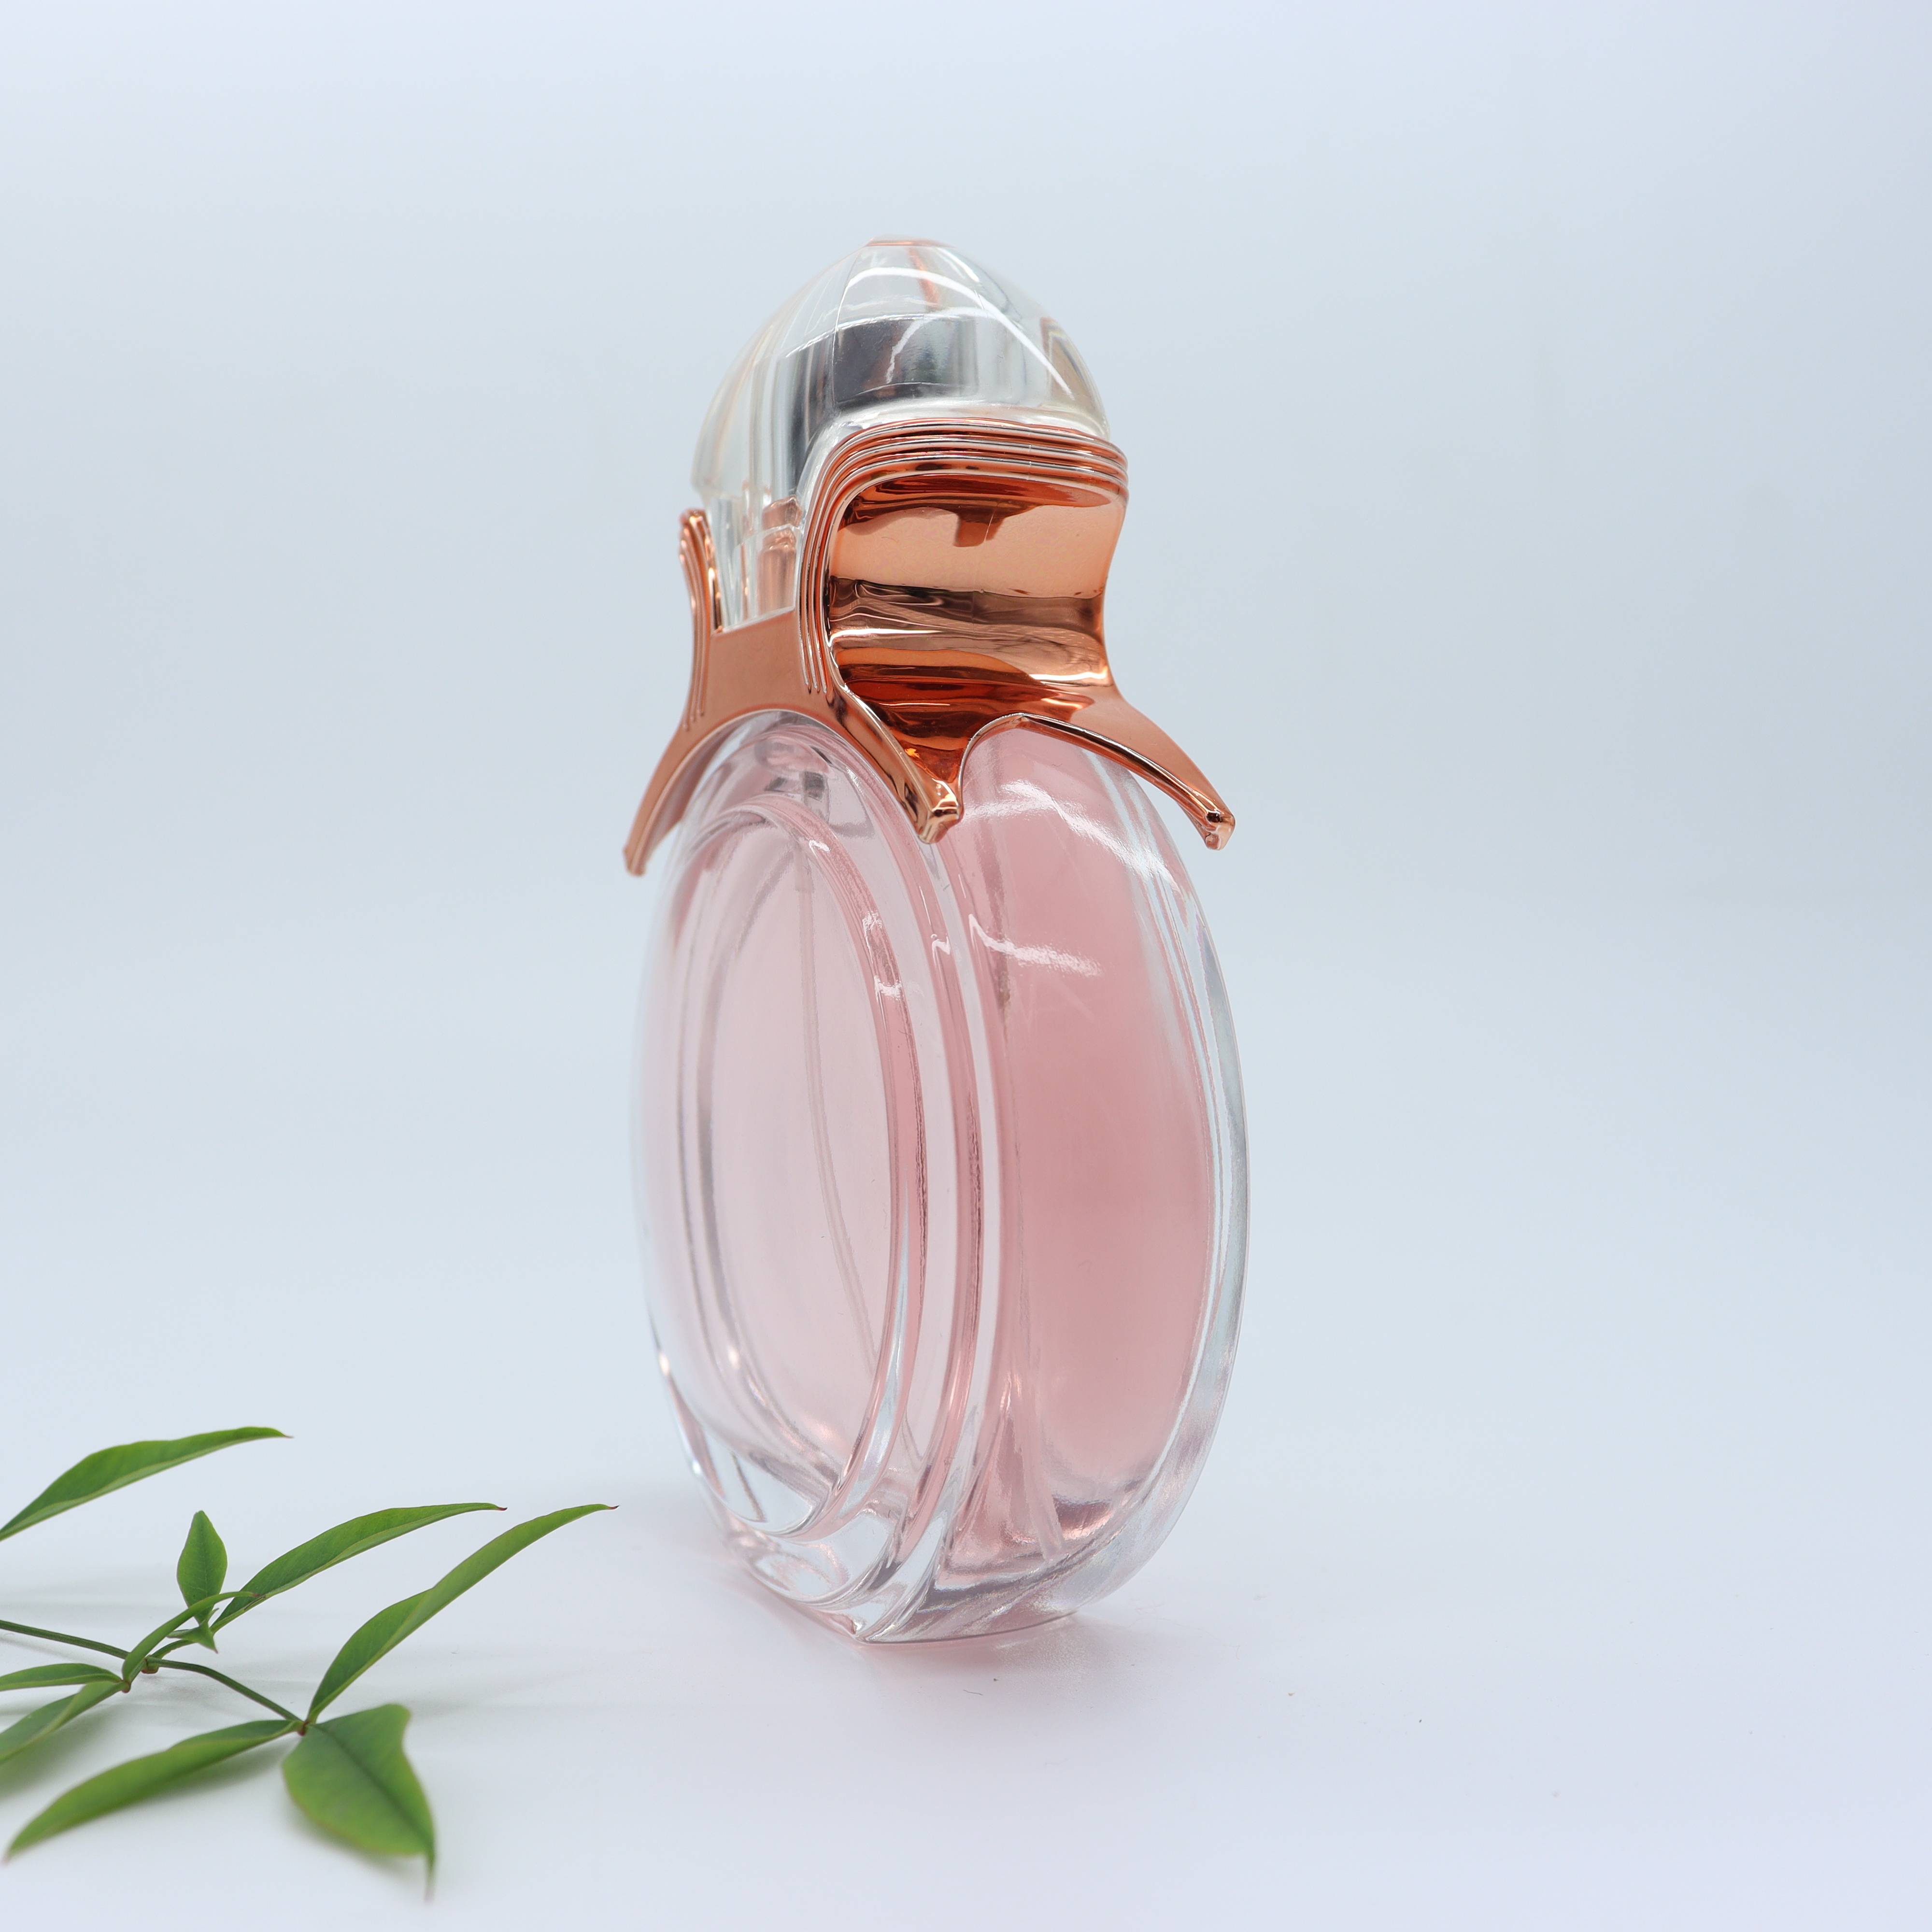 Cute round shape Luxury perfume bottles factory manufacture supply 55ml glass bottle